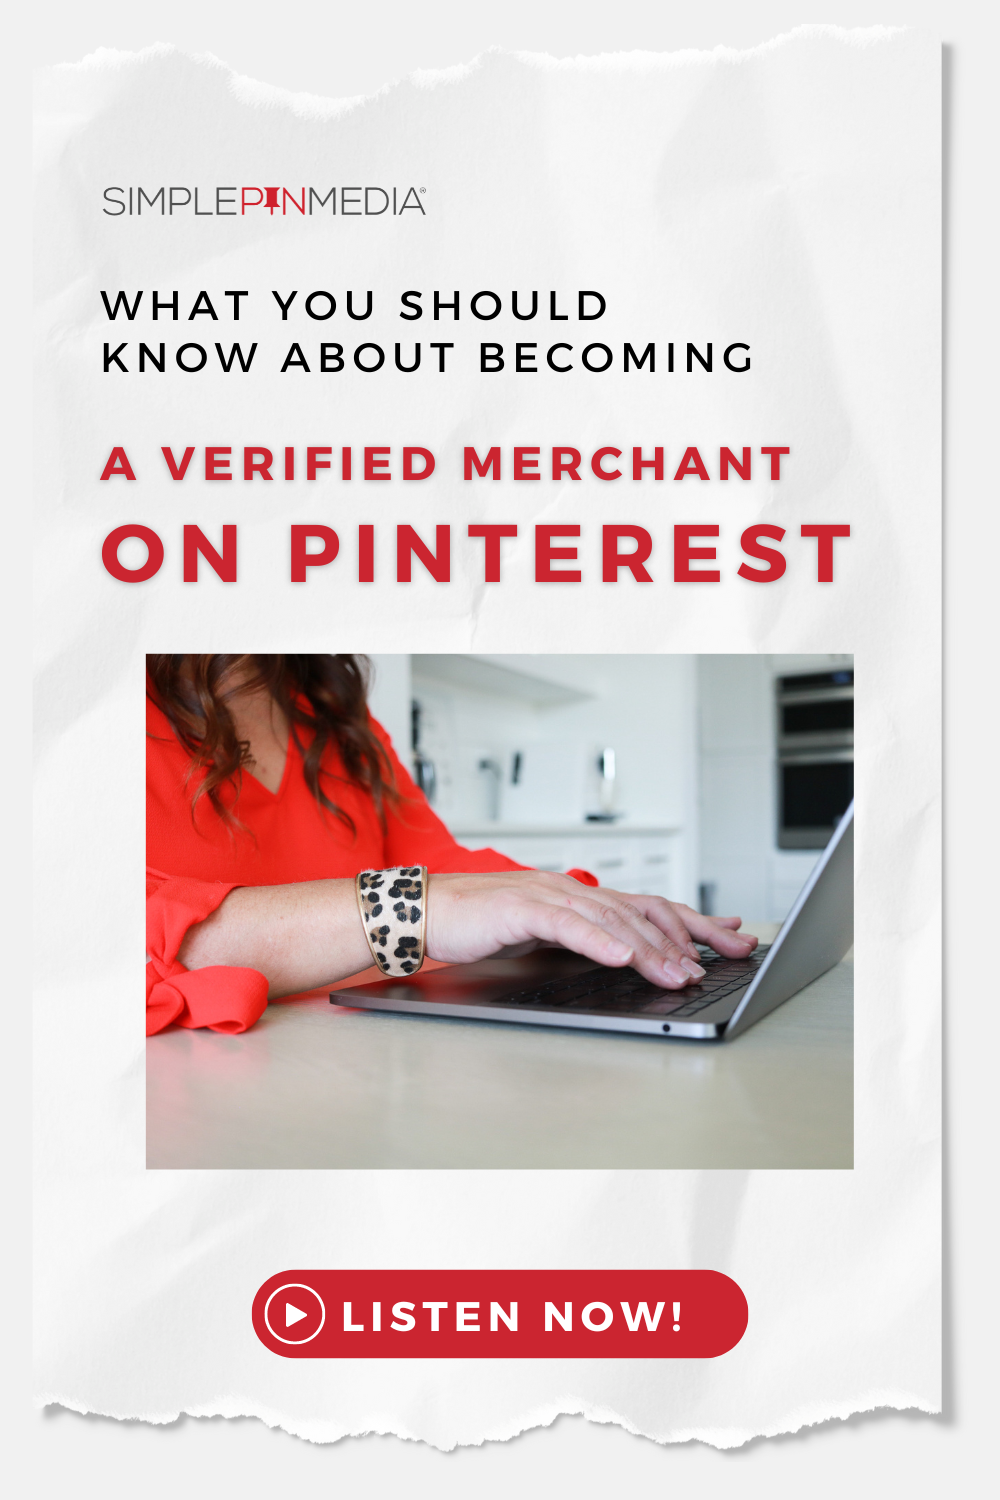 374 – What To Know About The Pinterest Verified Merchant Program